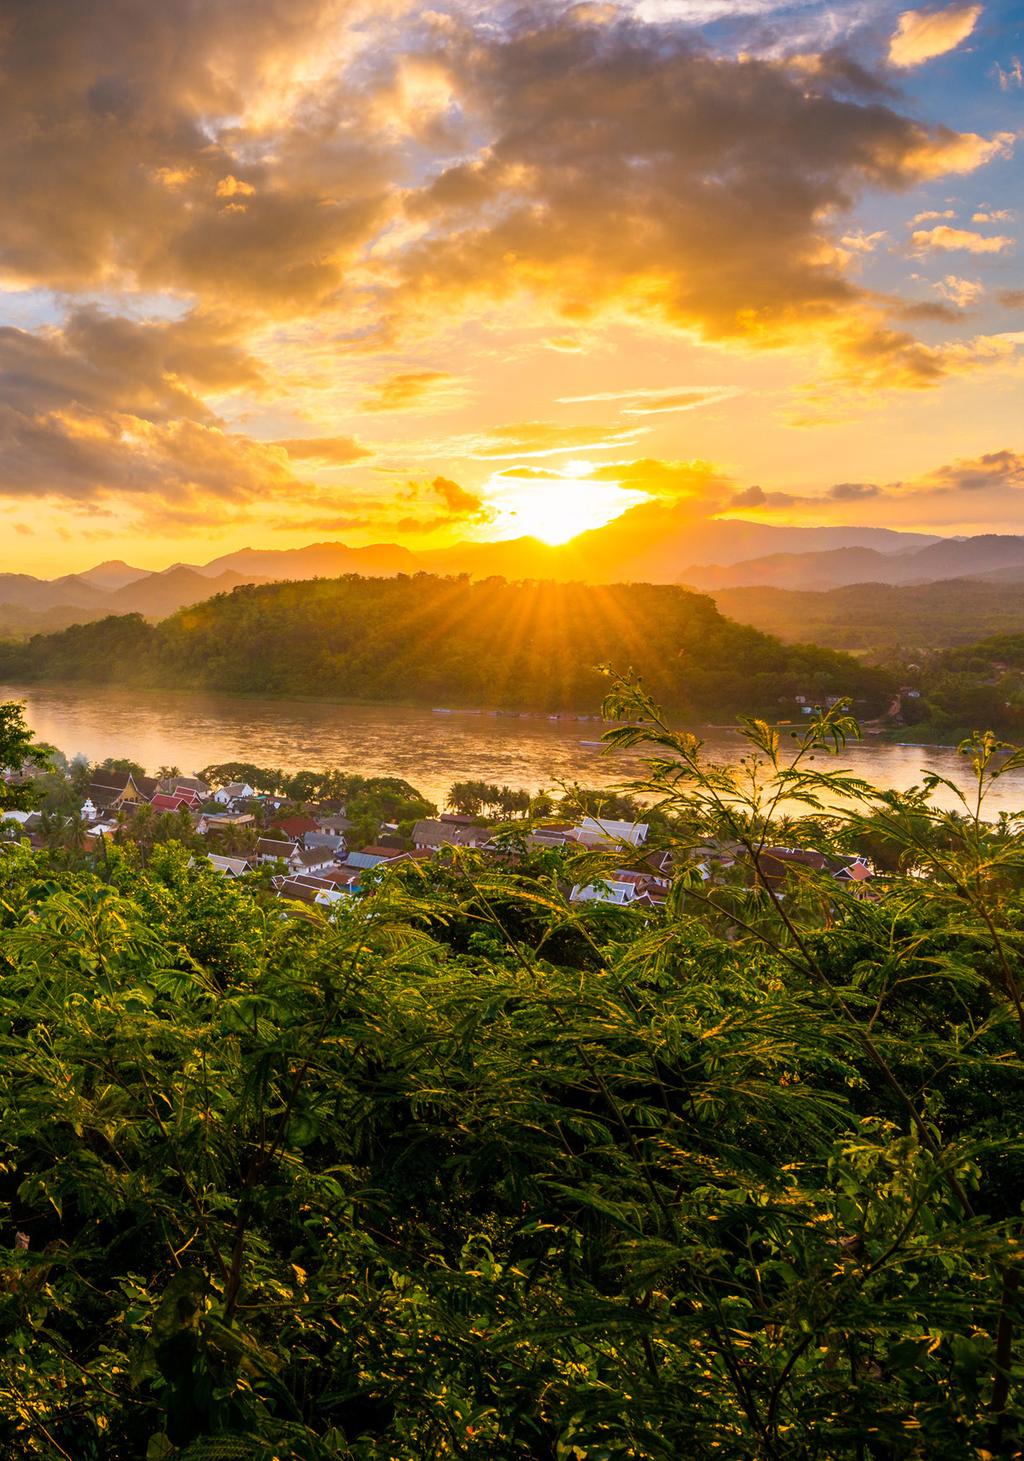 JOIN US ON A CRUISE ALONG THE MIGHTY MEKONG THROUGH LAOS Our captivating tour journeys through Laos encompassing some of the most fascinating parts of the country, exploring not only its historic and